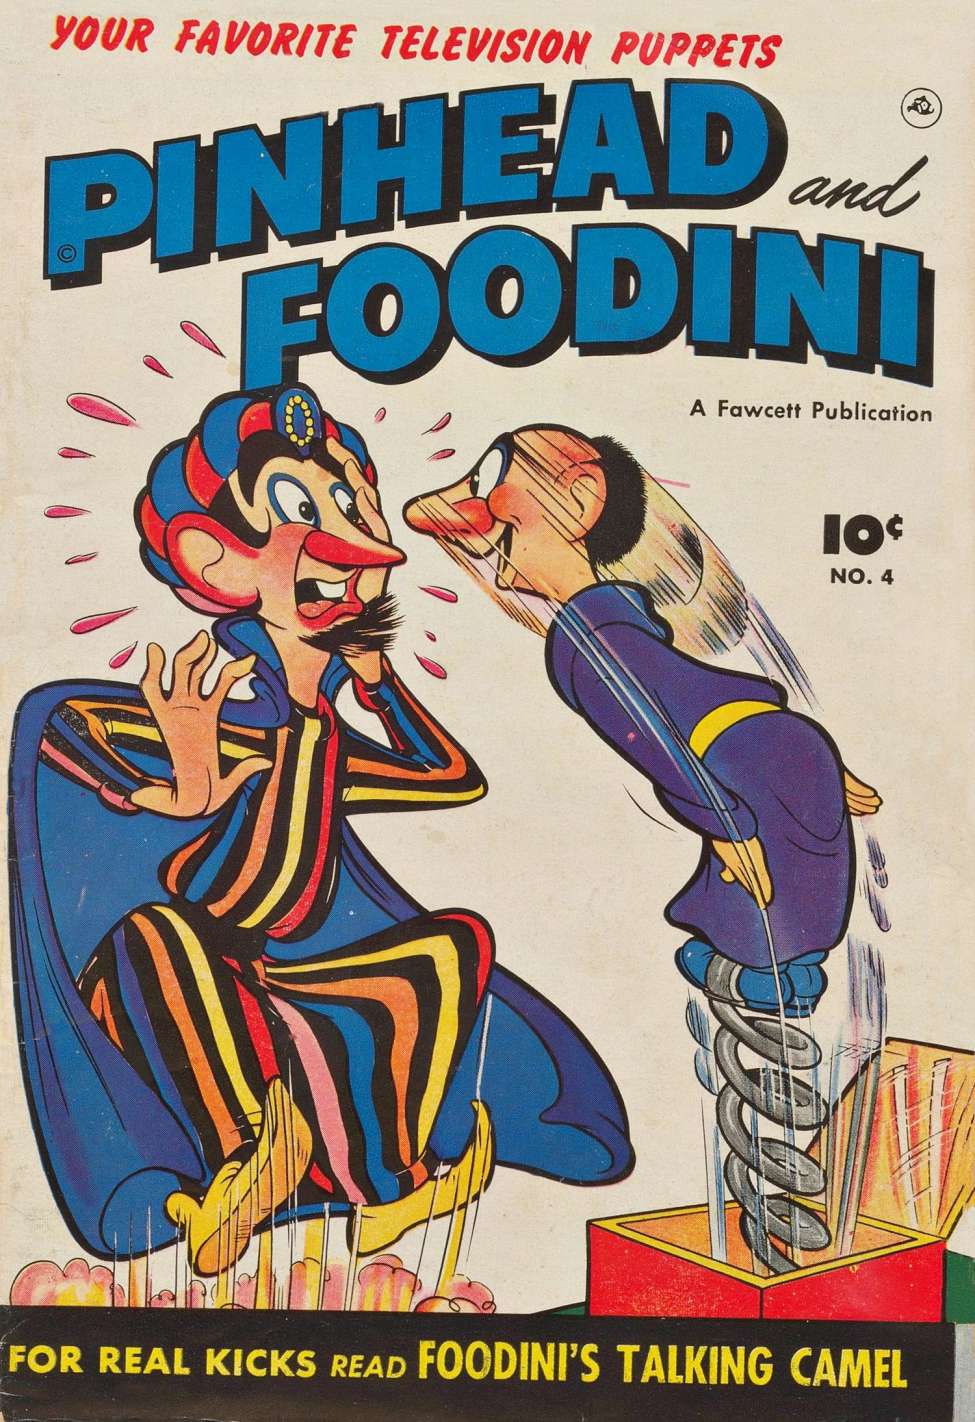 Book Cover For Pinhead and Foodini 4